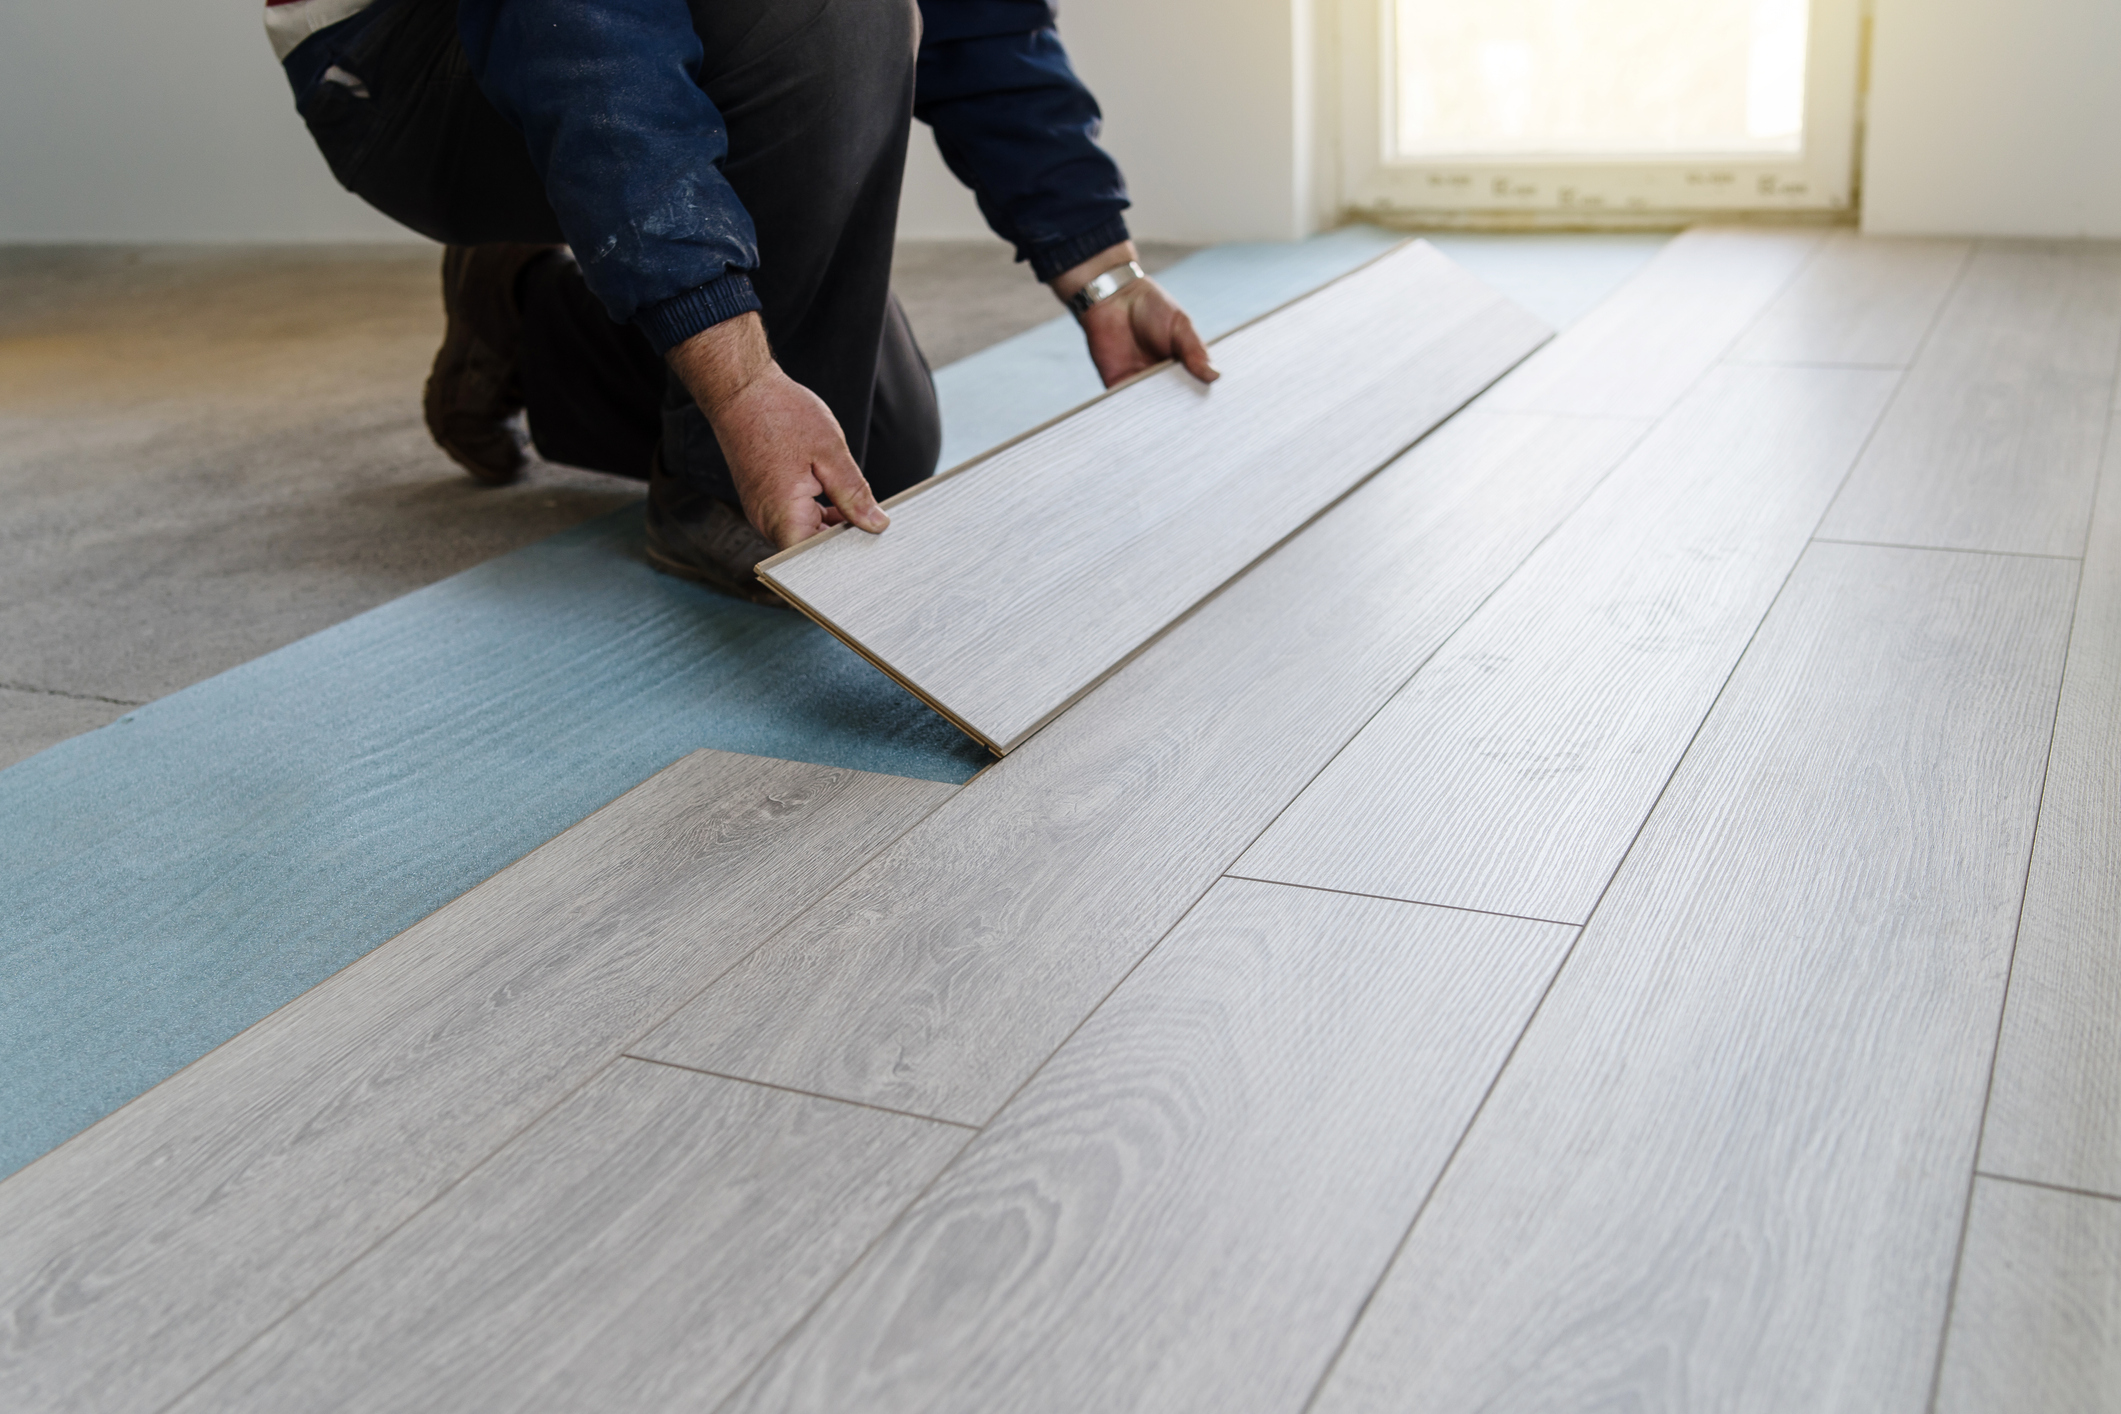 And Easy Temporary Flooring Ideas, How Much To Charge For Laminate Flooring